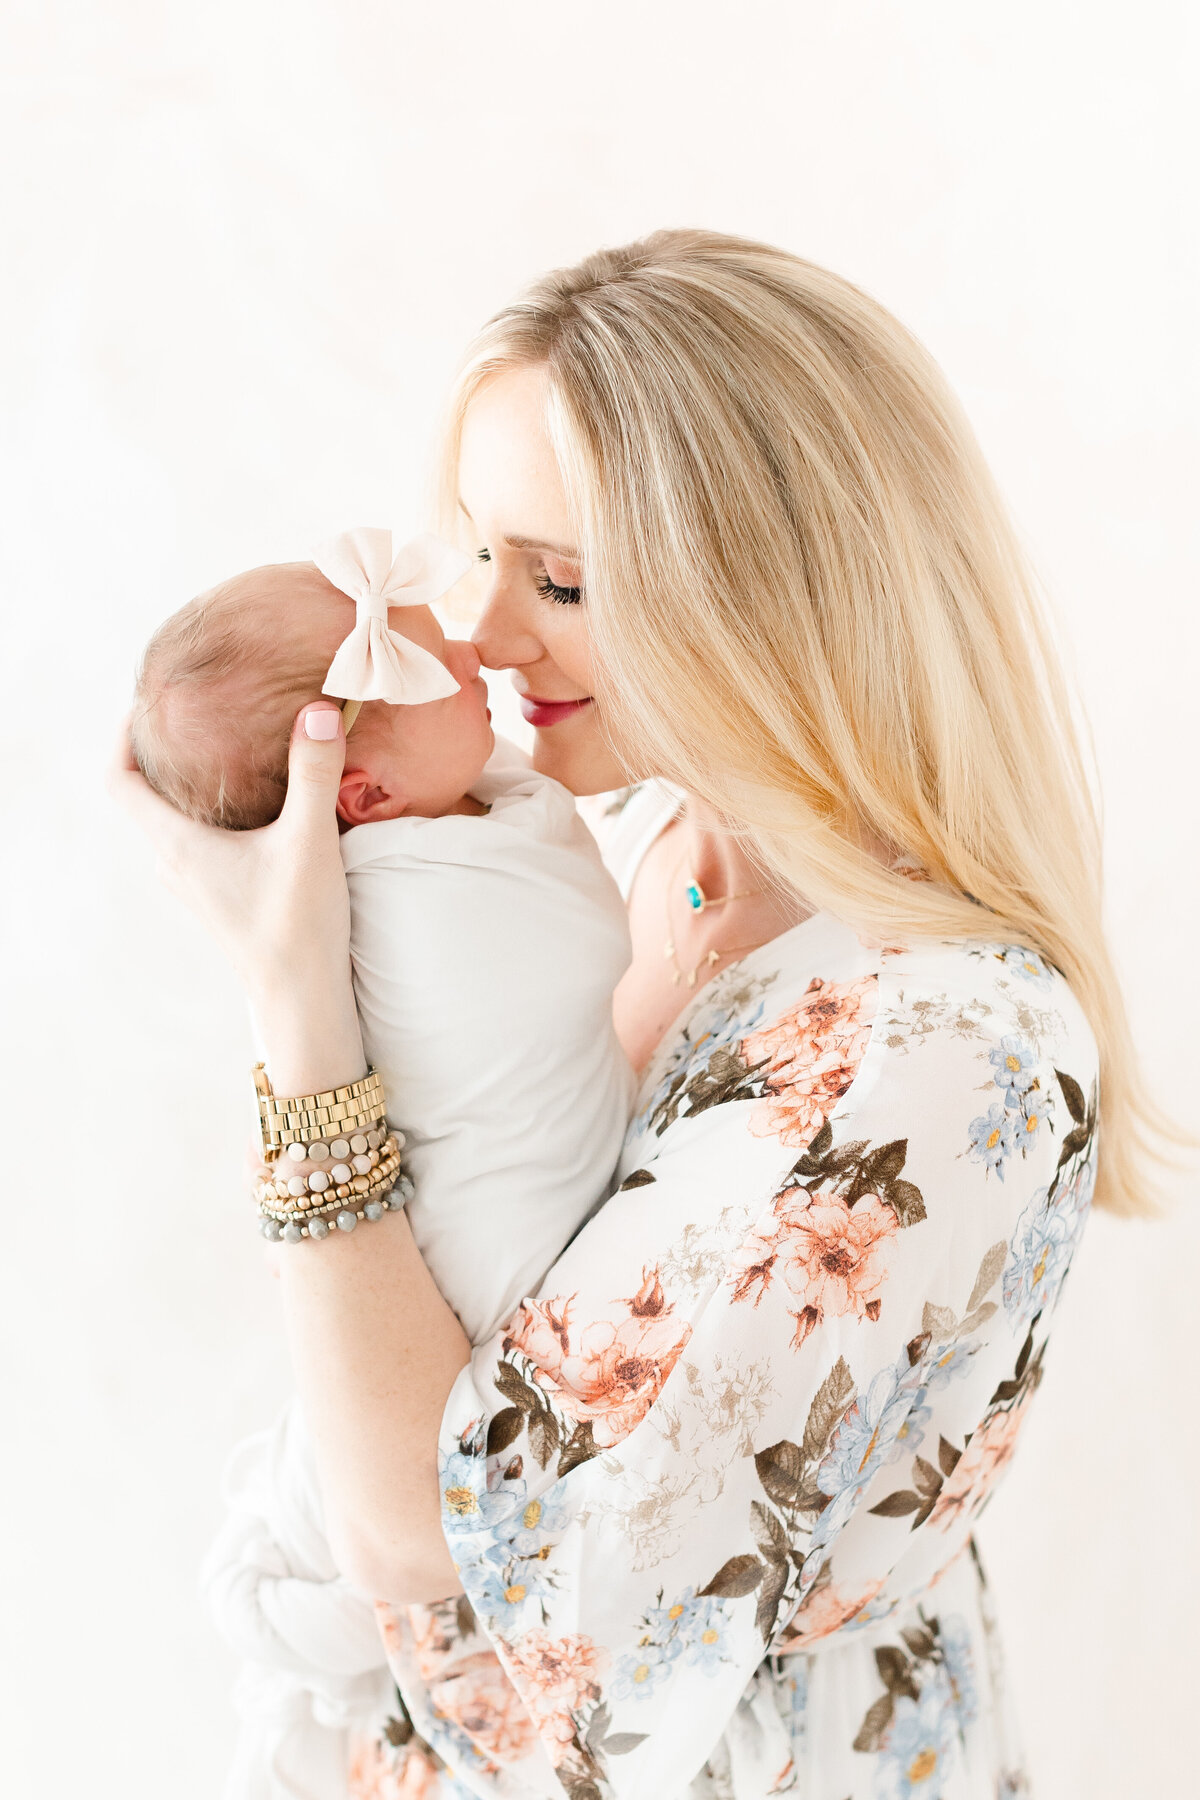 A DC newborn photography image of a mother holding her baby nose to nose in front of a hand-painted canvas backdrop